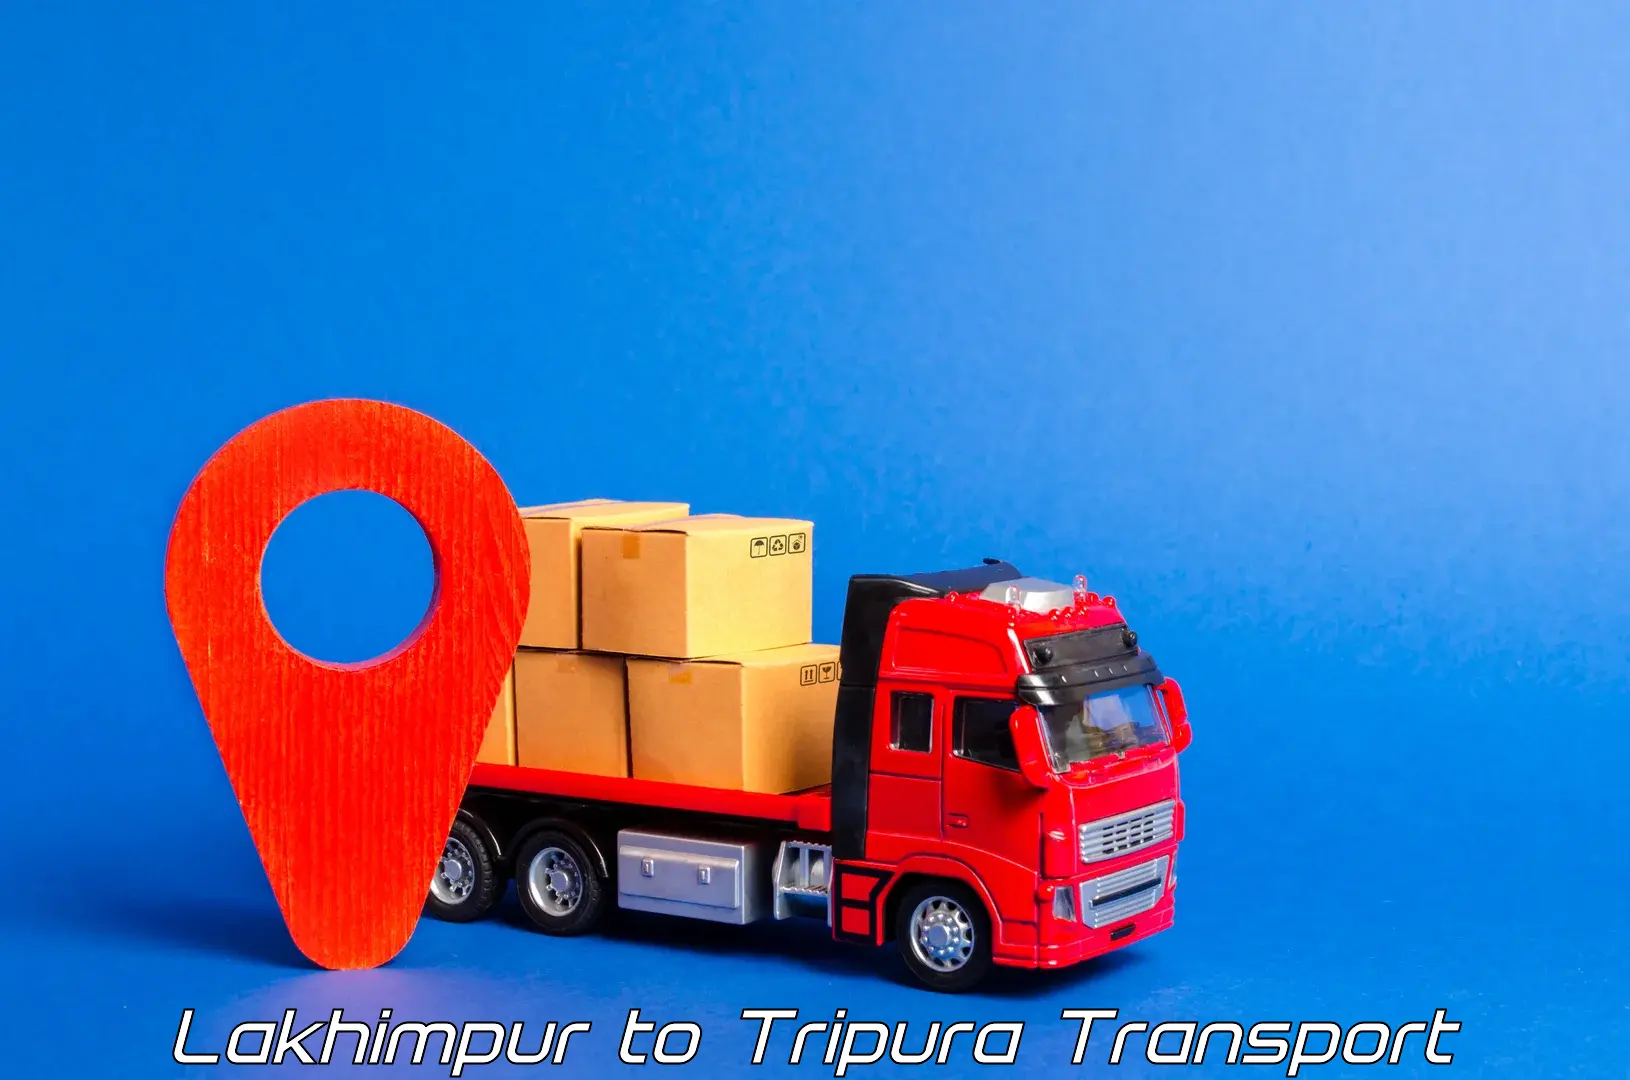 Transport bike from one state to another Lakhimpur to Sonamura